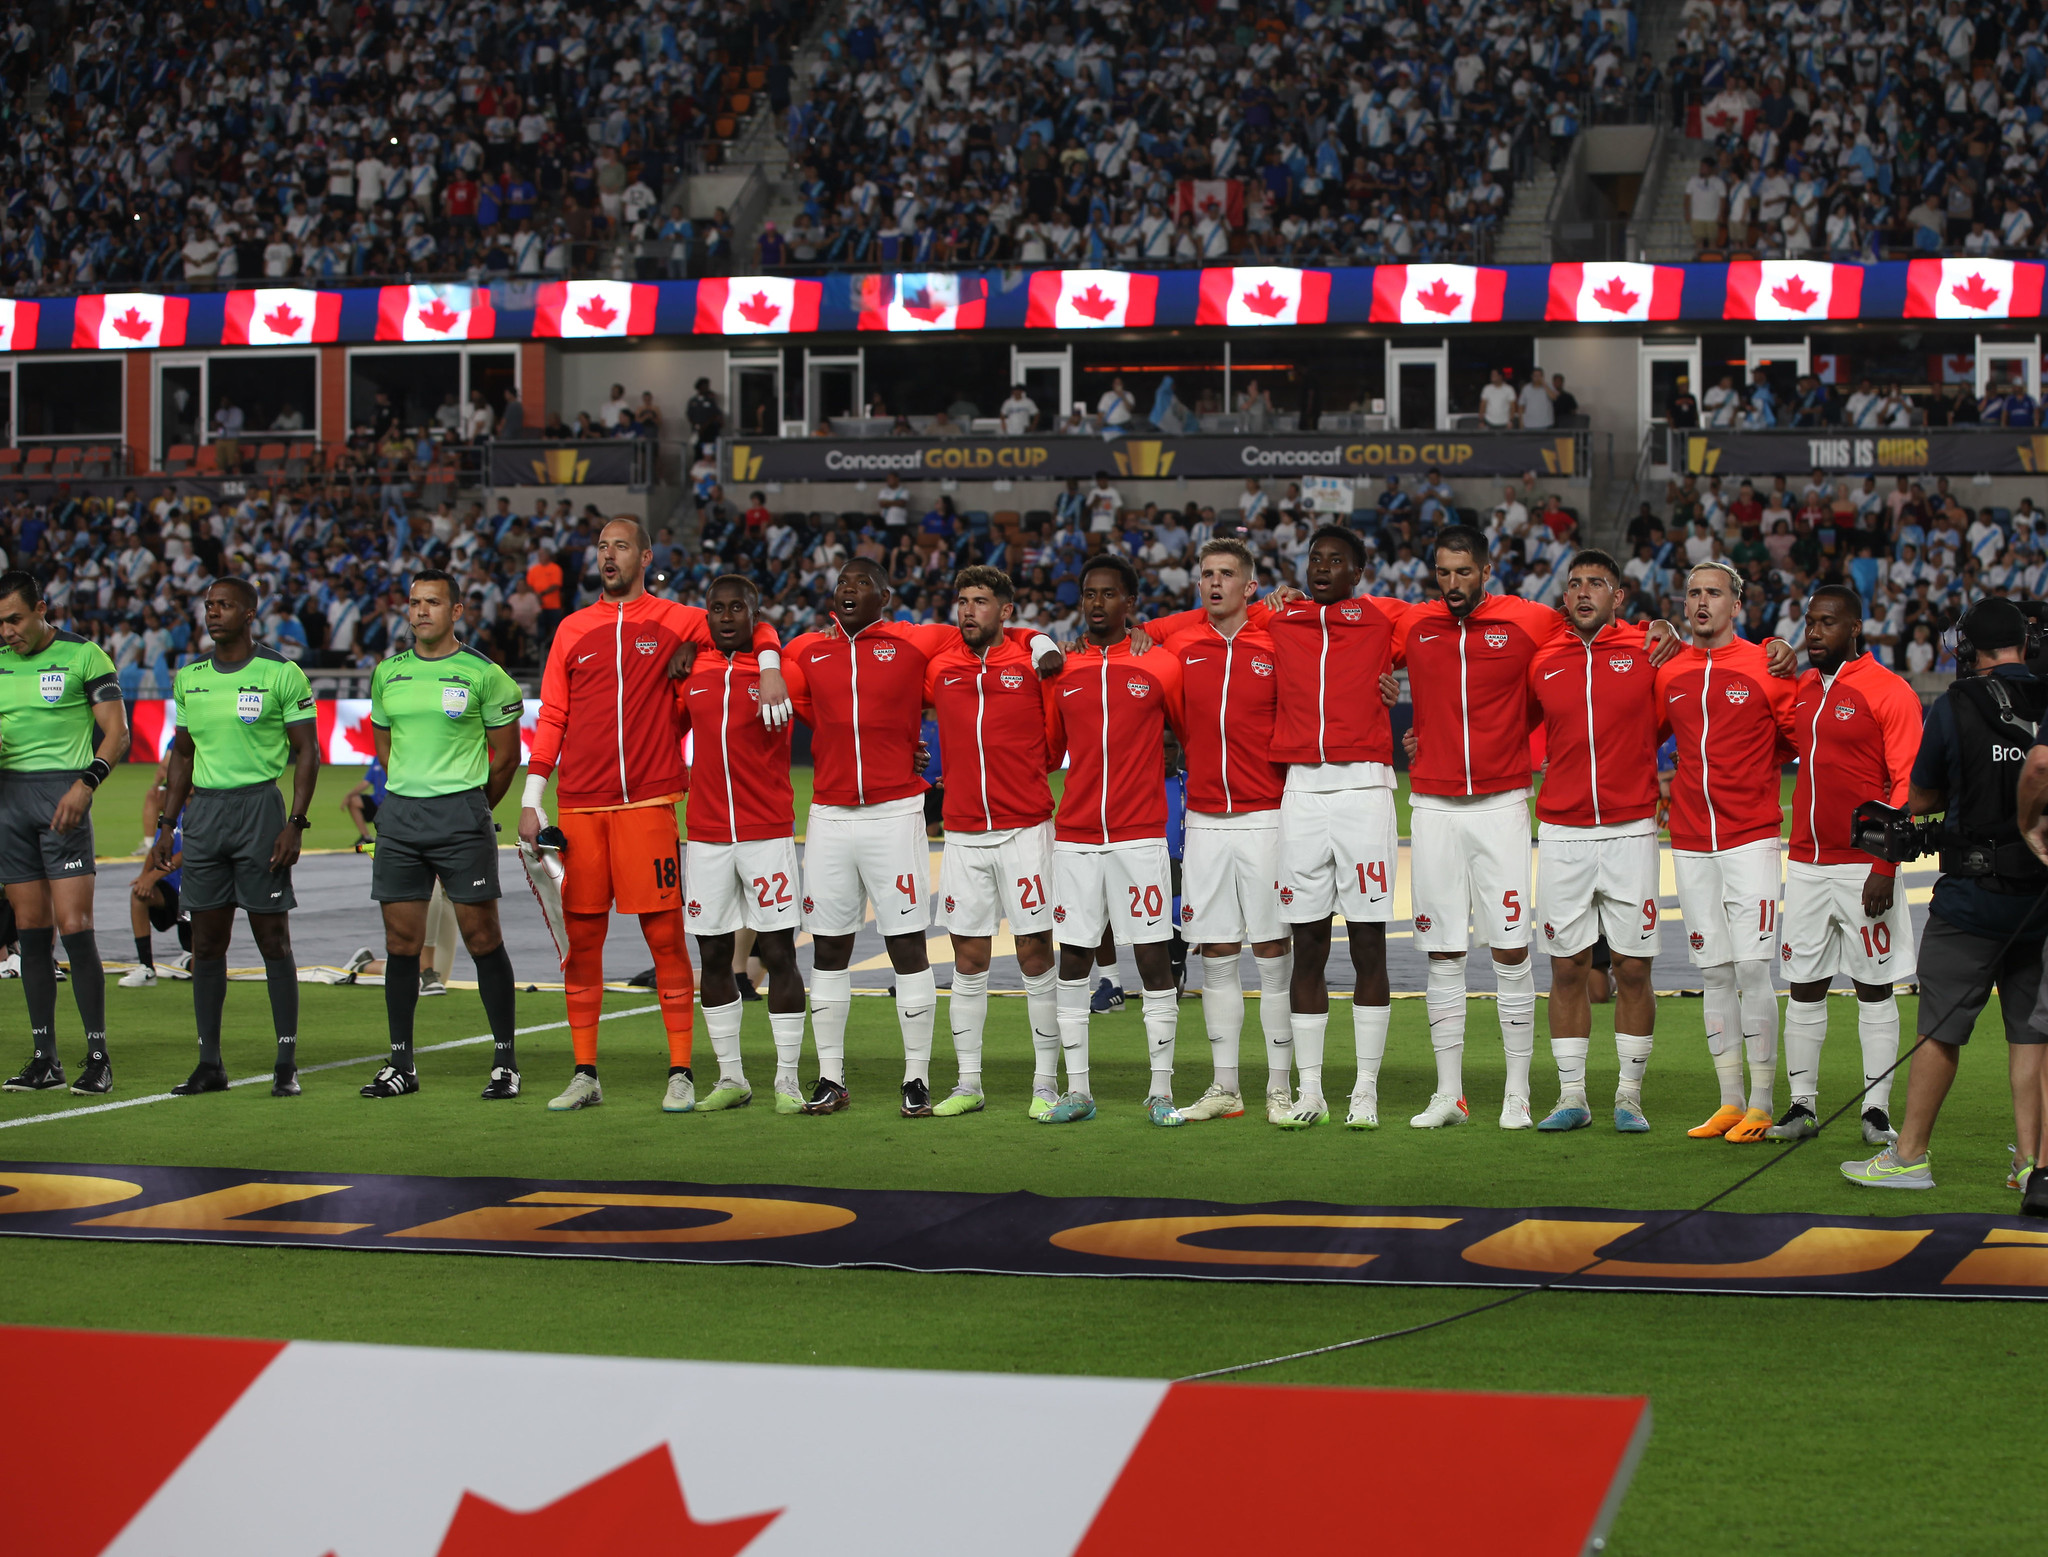 Canada Continues Frustrating Gold Cup With a Draw - 13th Man Sports